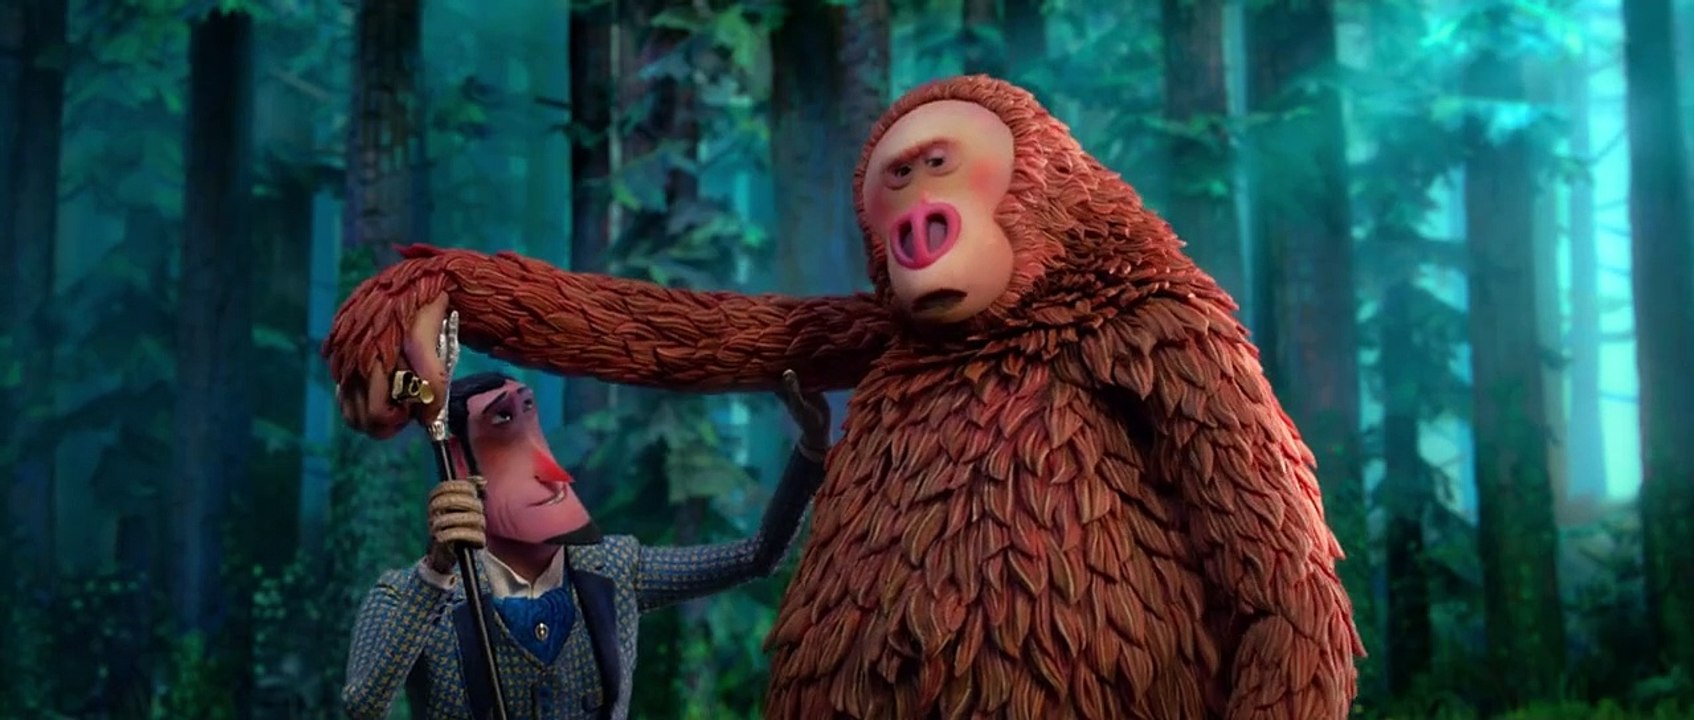 Watch Missing Link (2019) Full Movie For Free